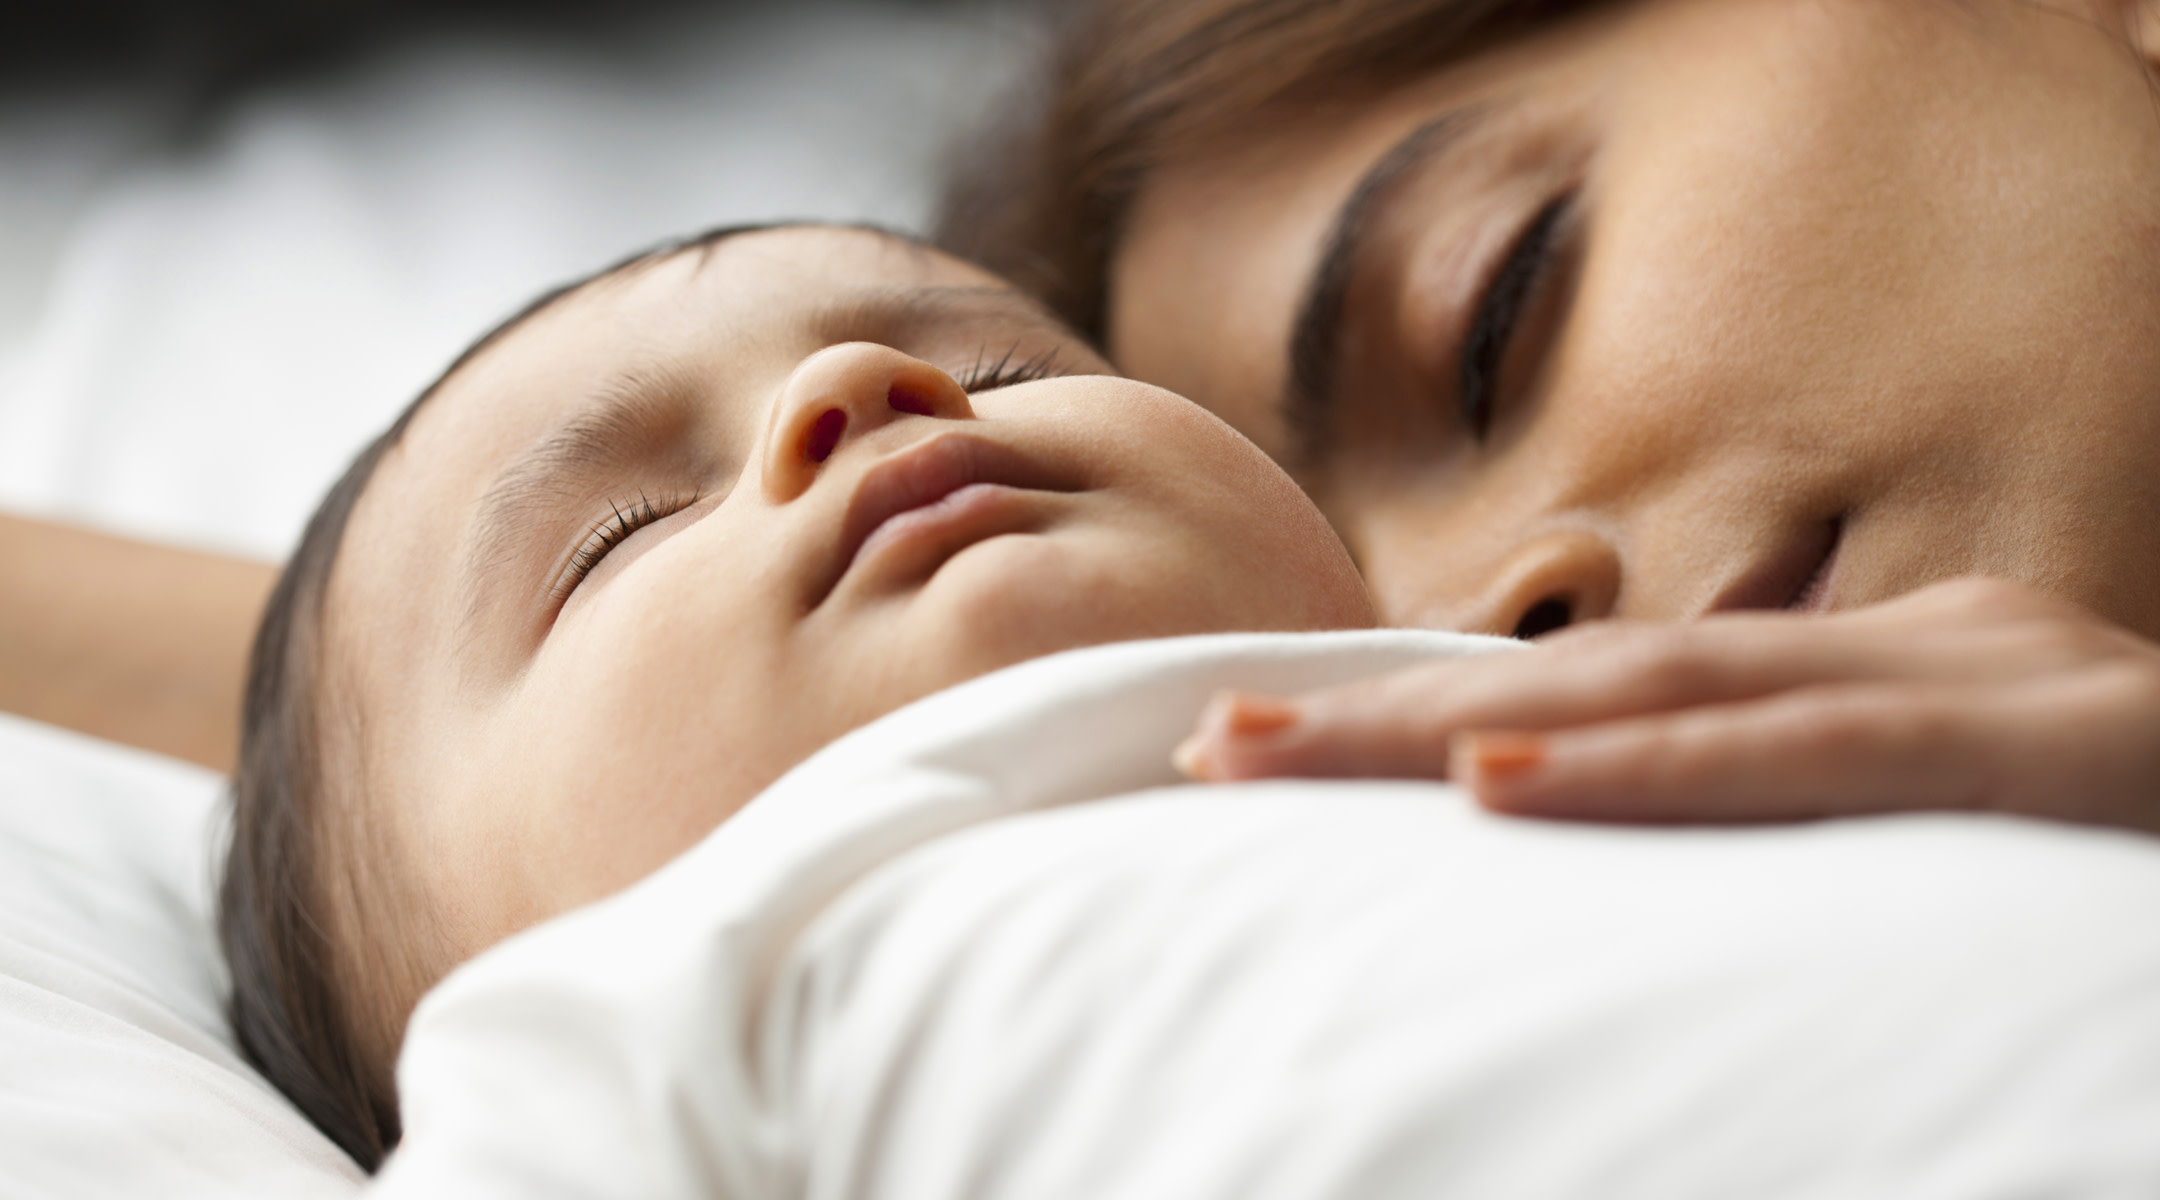 Myths And Truths About Co-Sleeping